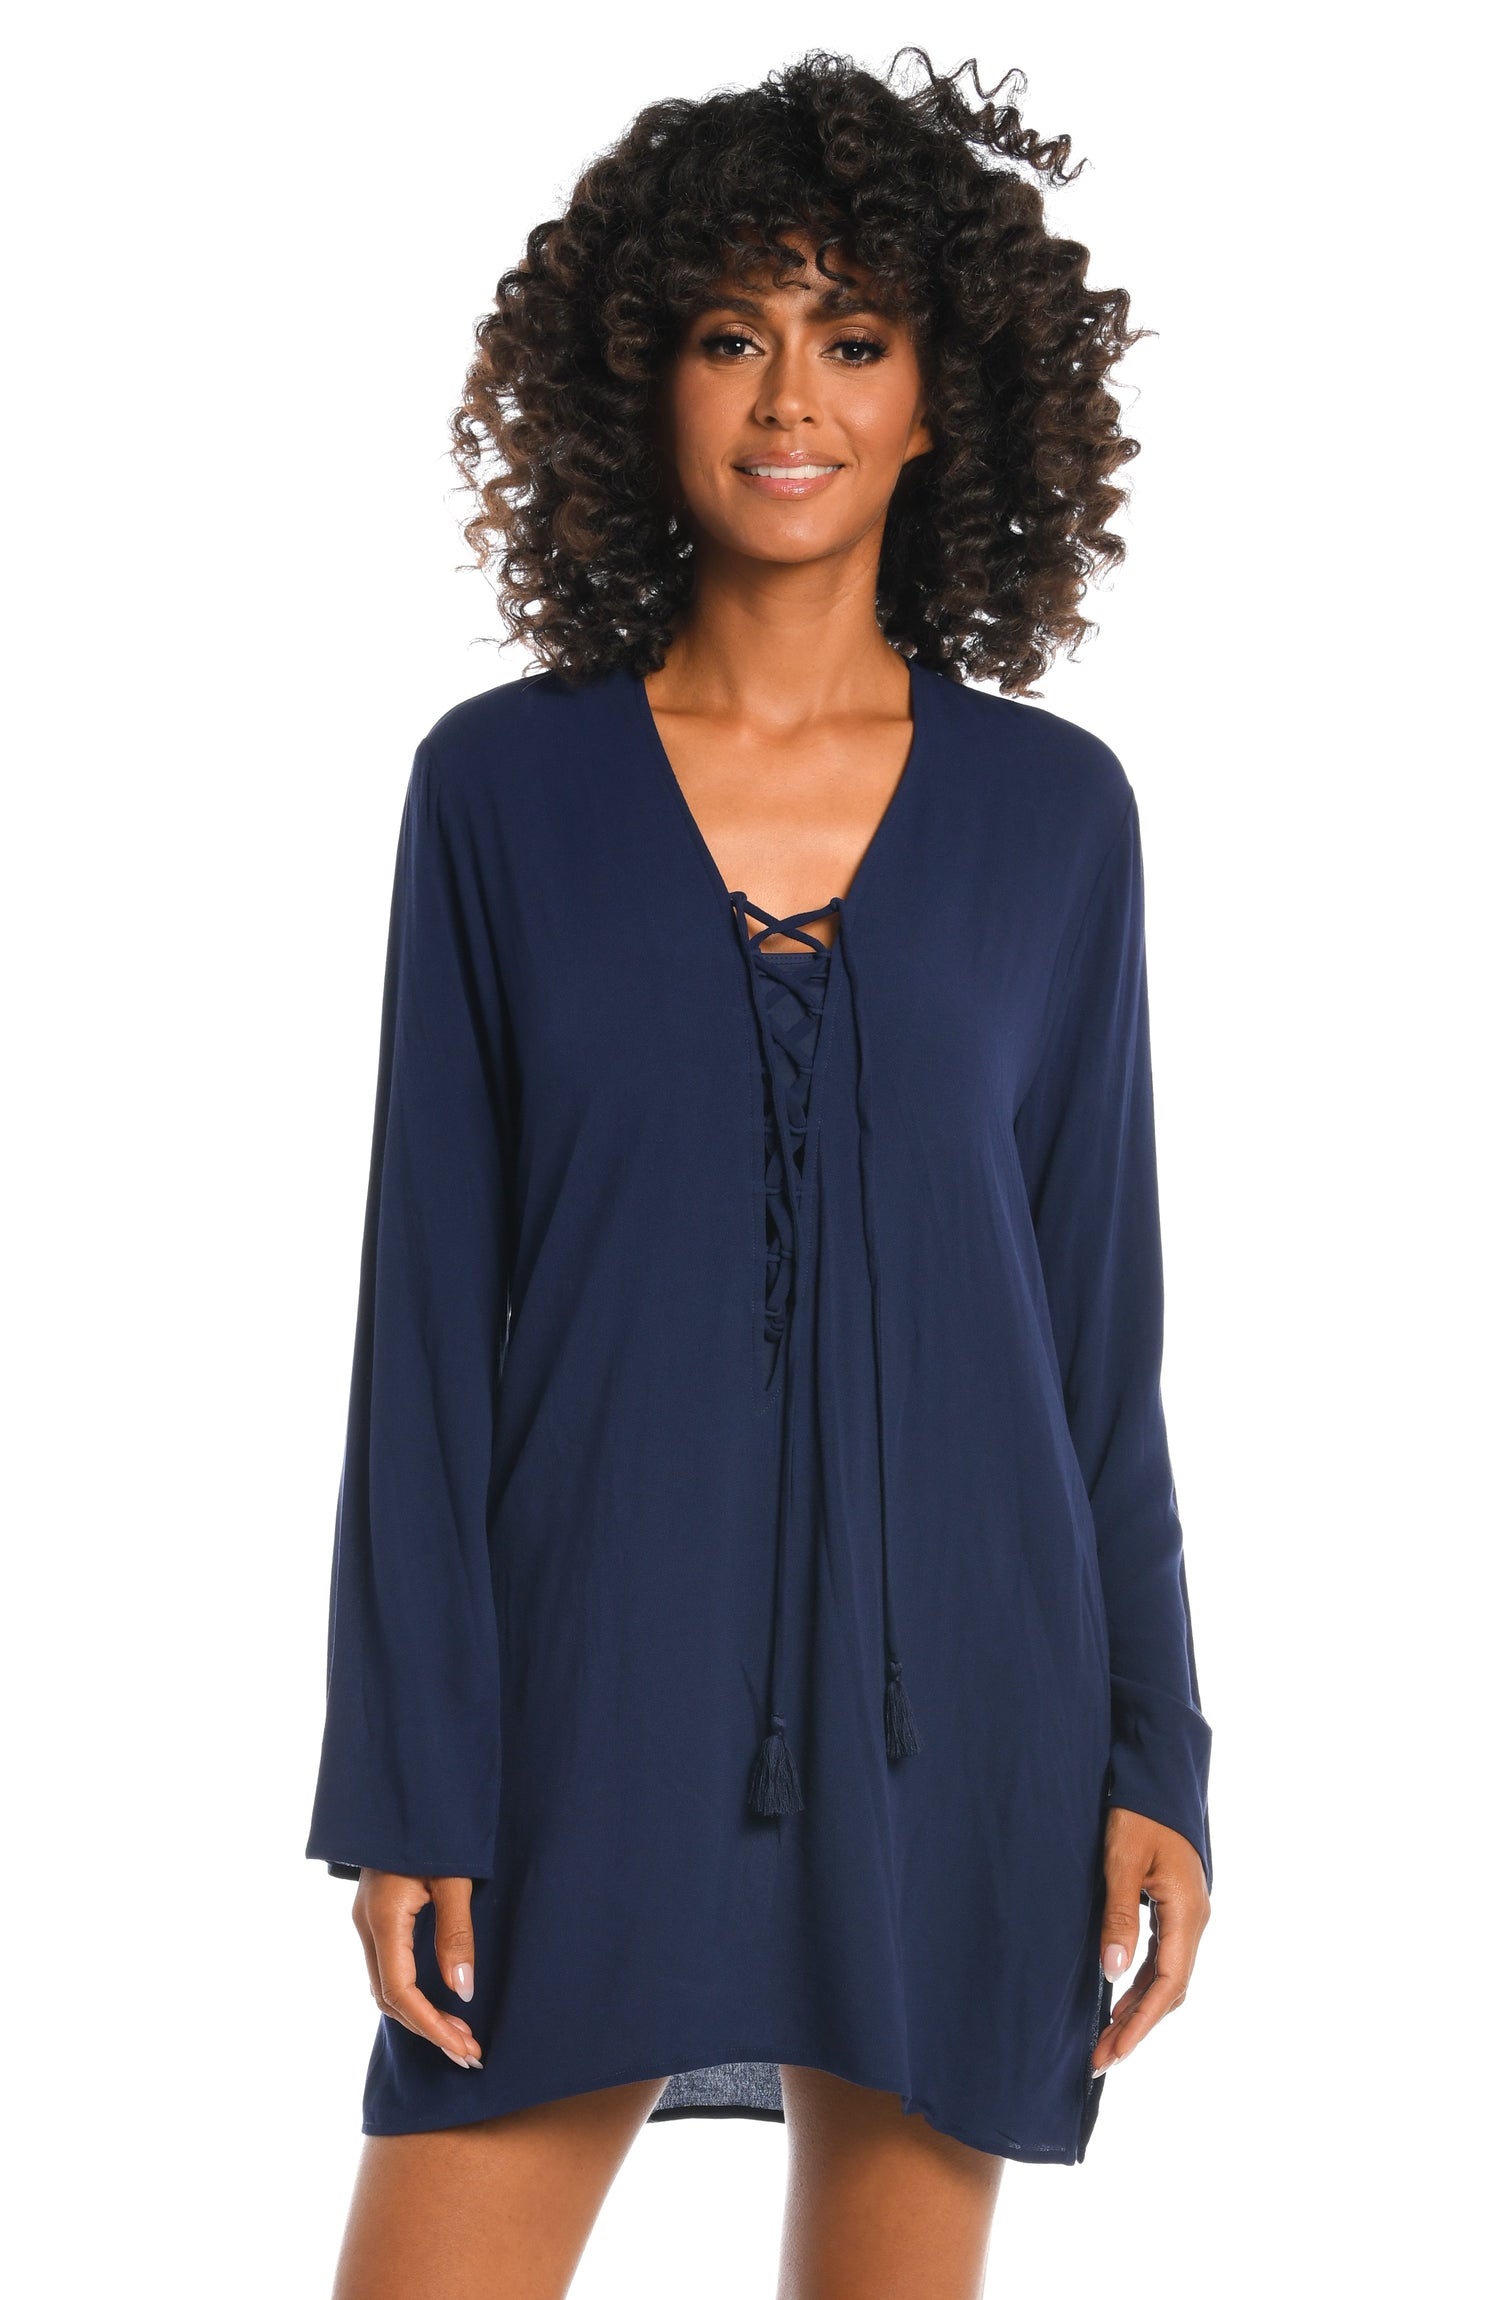 Model is wearing a solid indigo colored tunic cover up from our Beachcomber Basics collection!